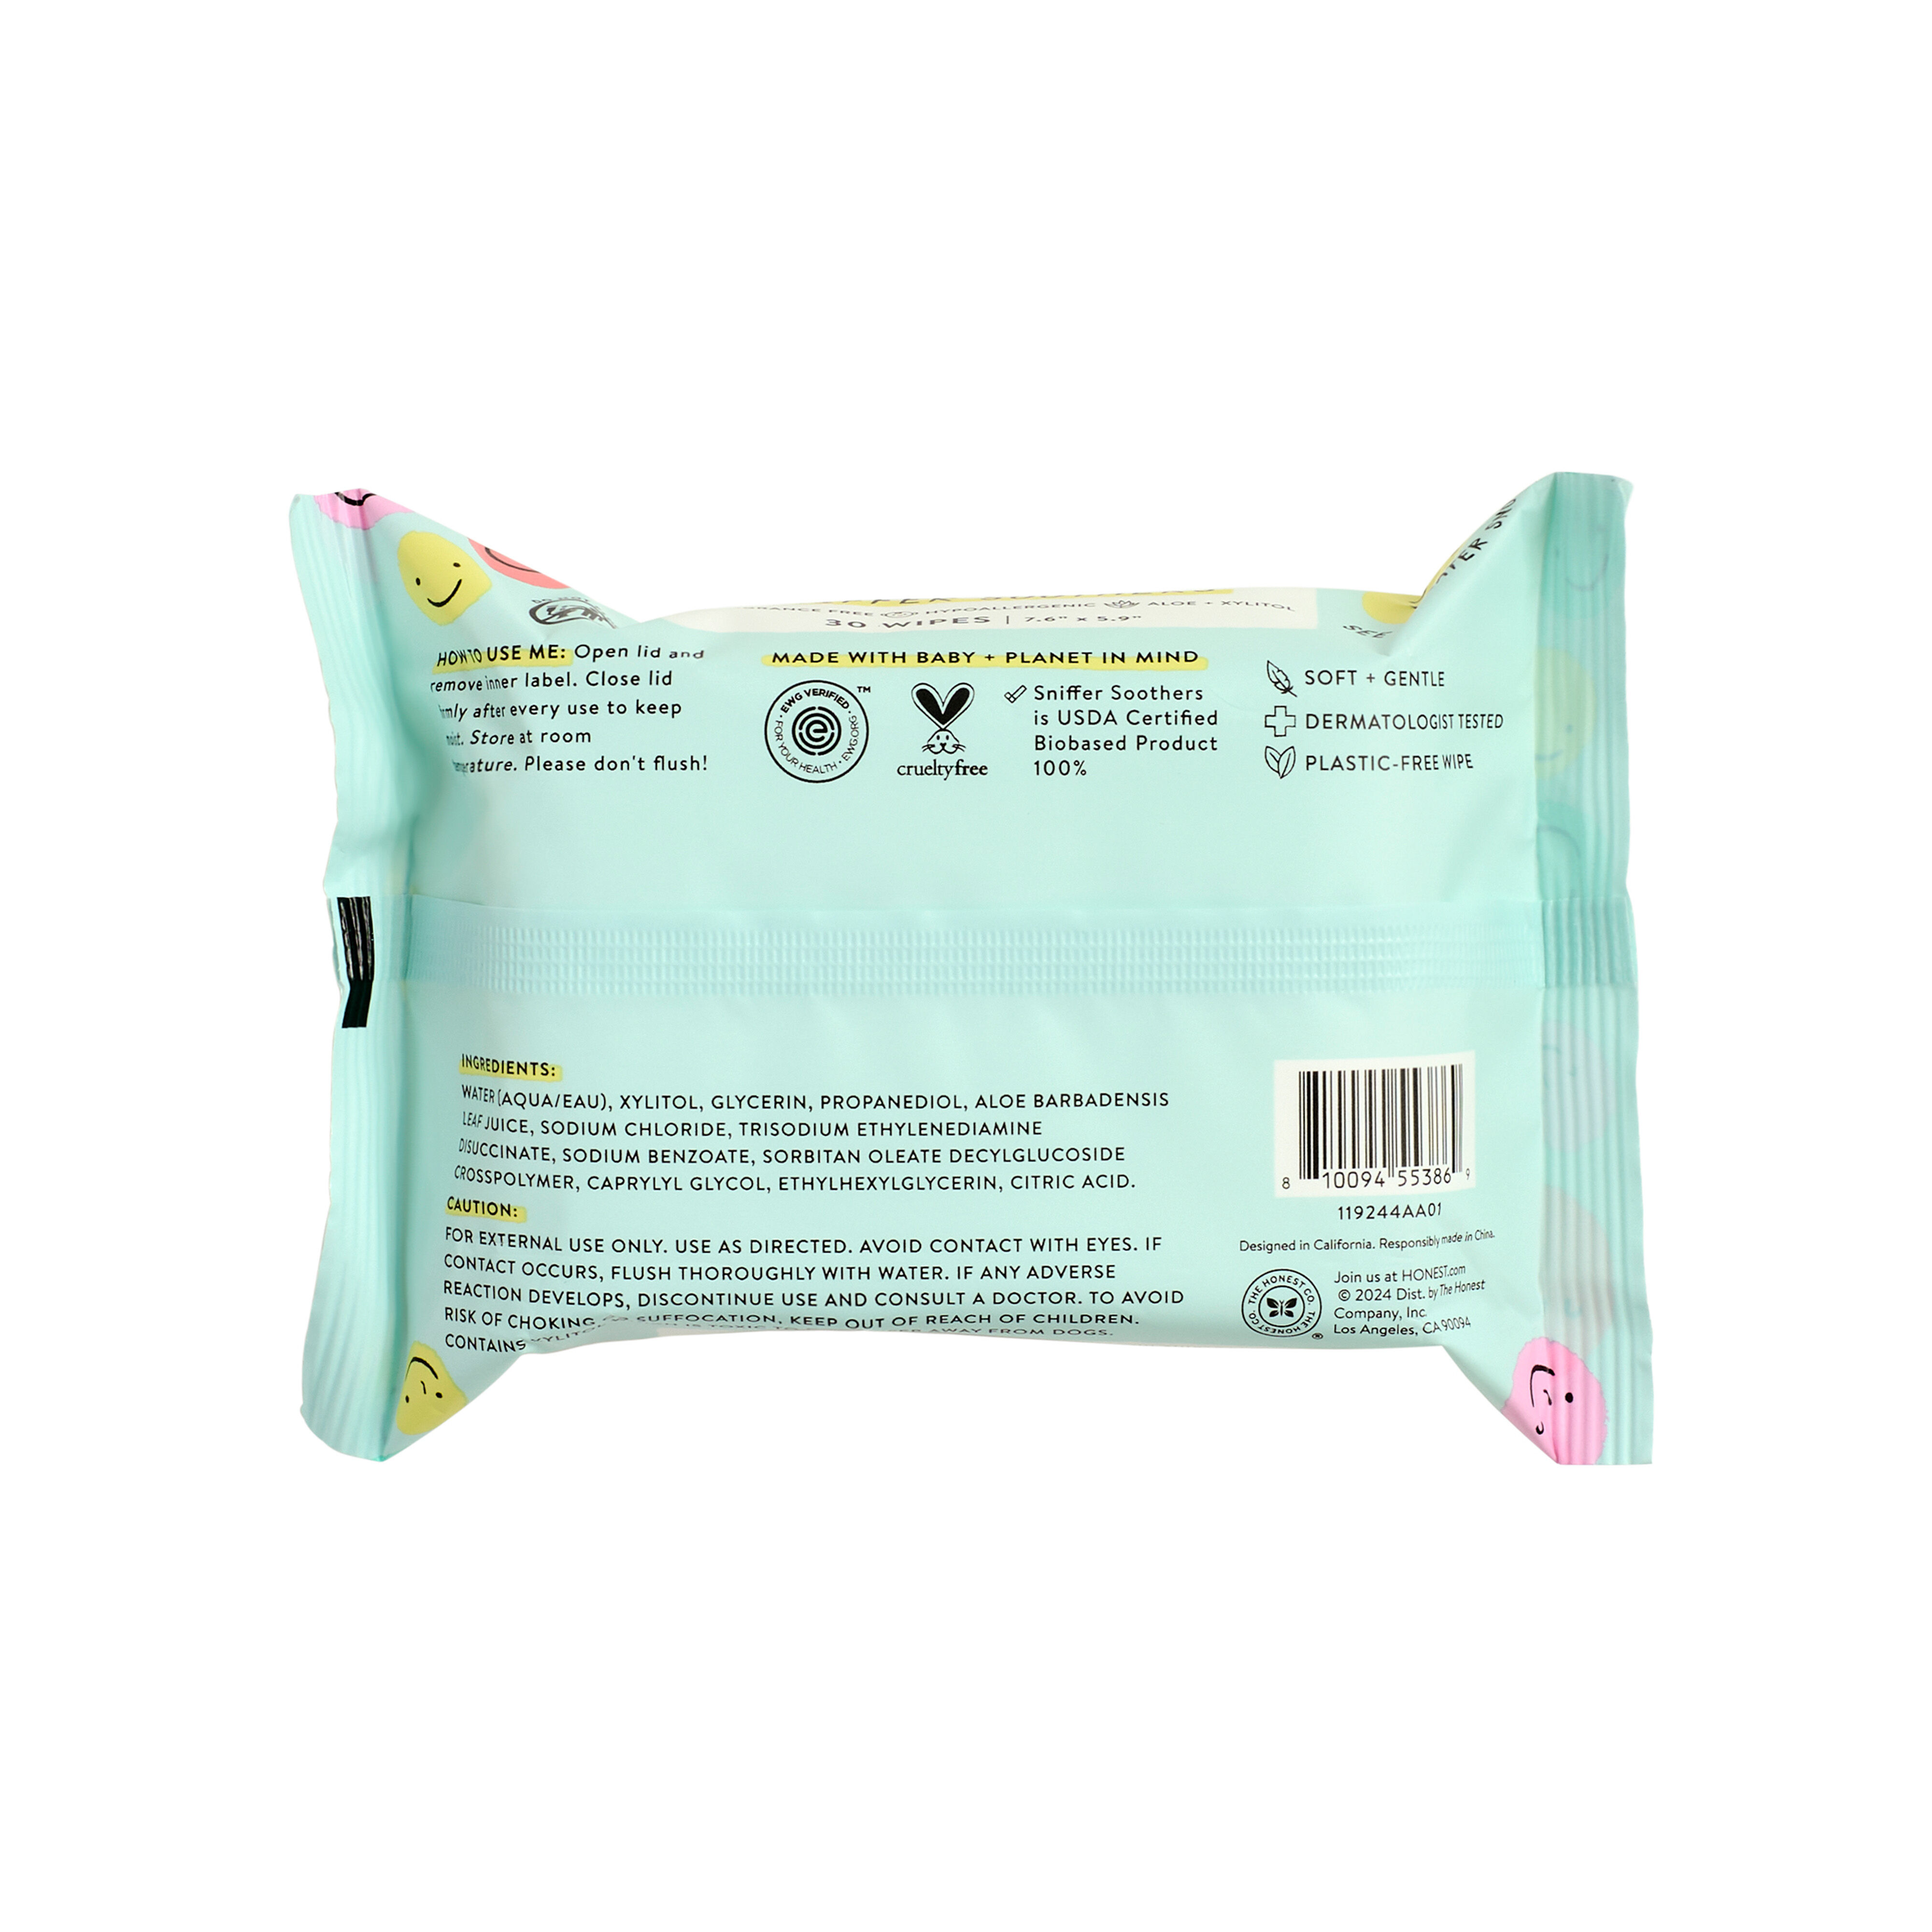 Sniffer Soothers Nose + Face Wipes, 30 Count